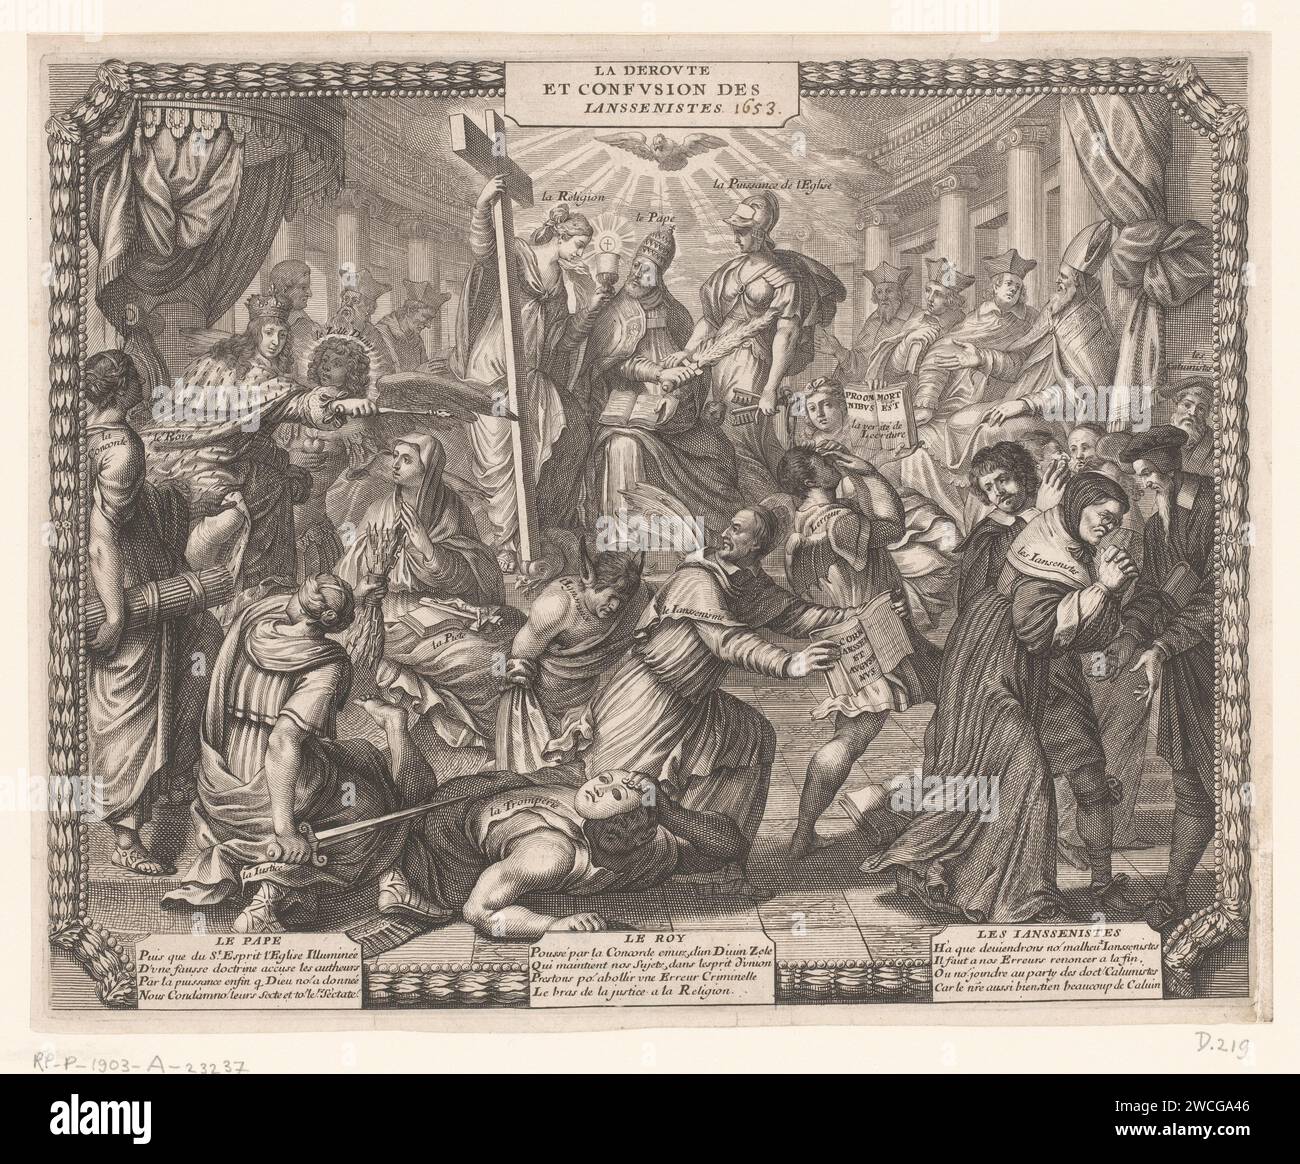 Avoiding the Jansenisten, Abraham Bosse, 1654 print The pope in the middle of the top is flanked by the allegorical figures religion and ecclesiastical power. The Holy Spirit flies above him. On the left the king sits on a throne with next to him the Divine zeal, the Eendracht, the righteousness and piety. The king banishes the allegorical figures ignorance, error and deception with Jansenism in the middle with 'the Augustine' in his hands, preceded by Jansenists.  paper etching / engraving pope. king. suspension, expulsion (from a society) Stock Photo